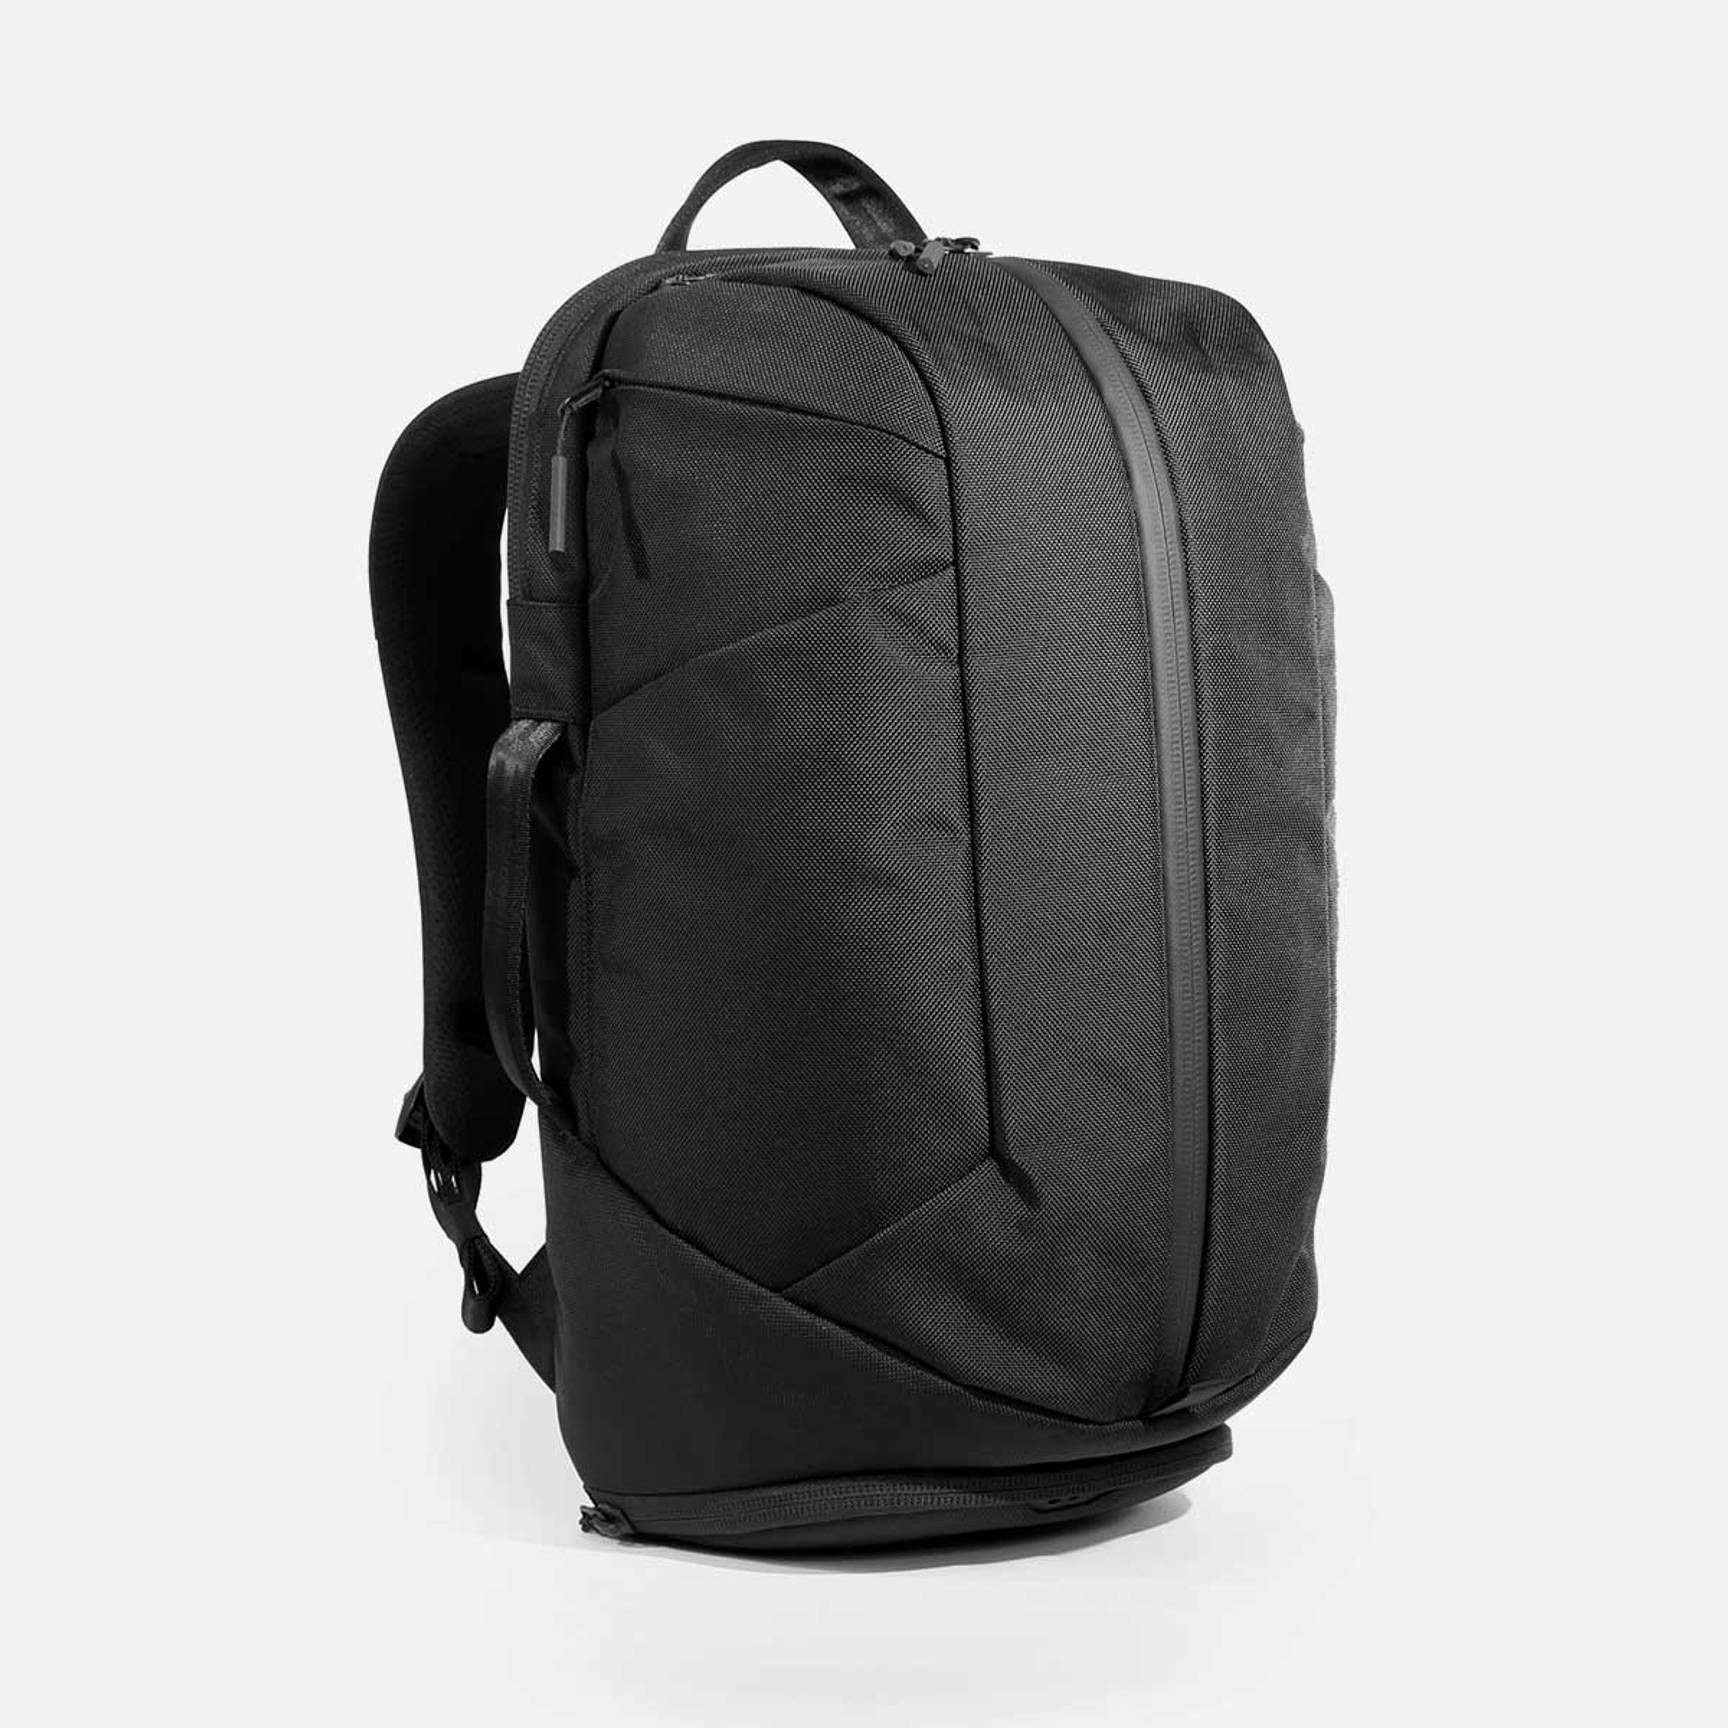 The Best Gym Bags for Men 2023  Backpacks, Duffel Bags and More